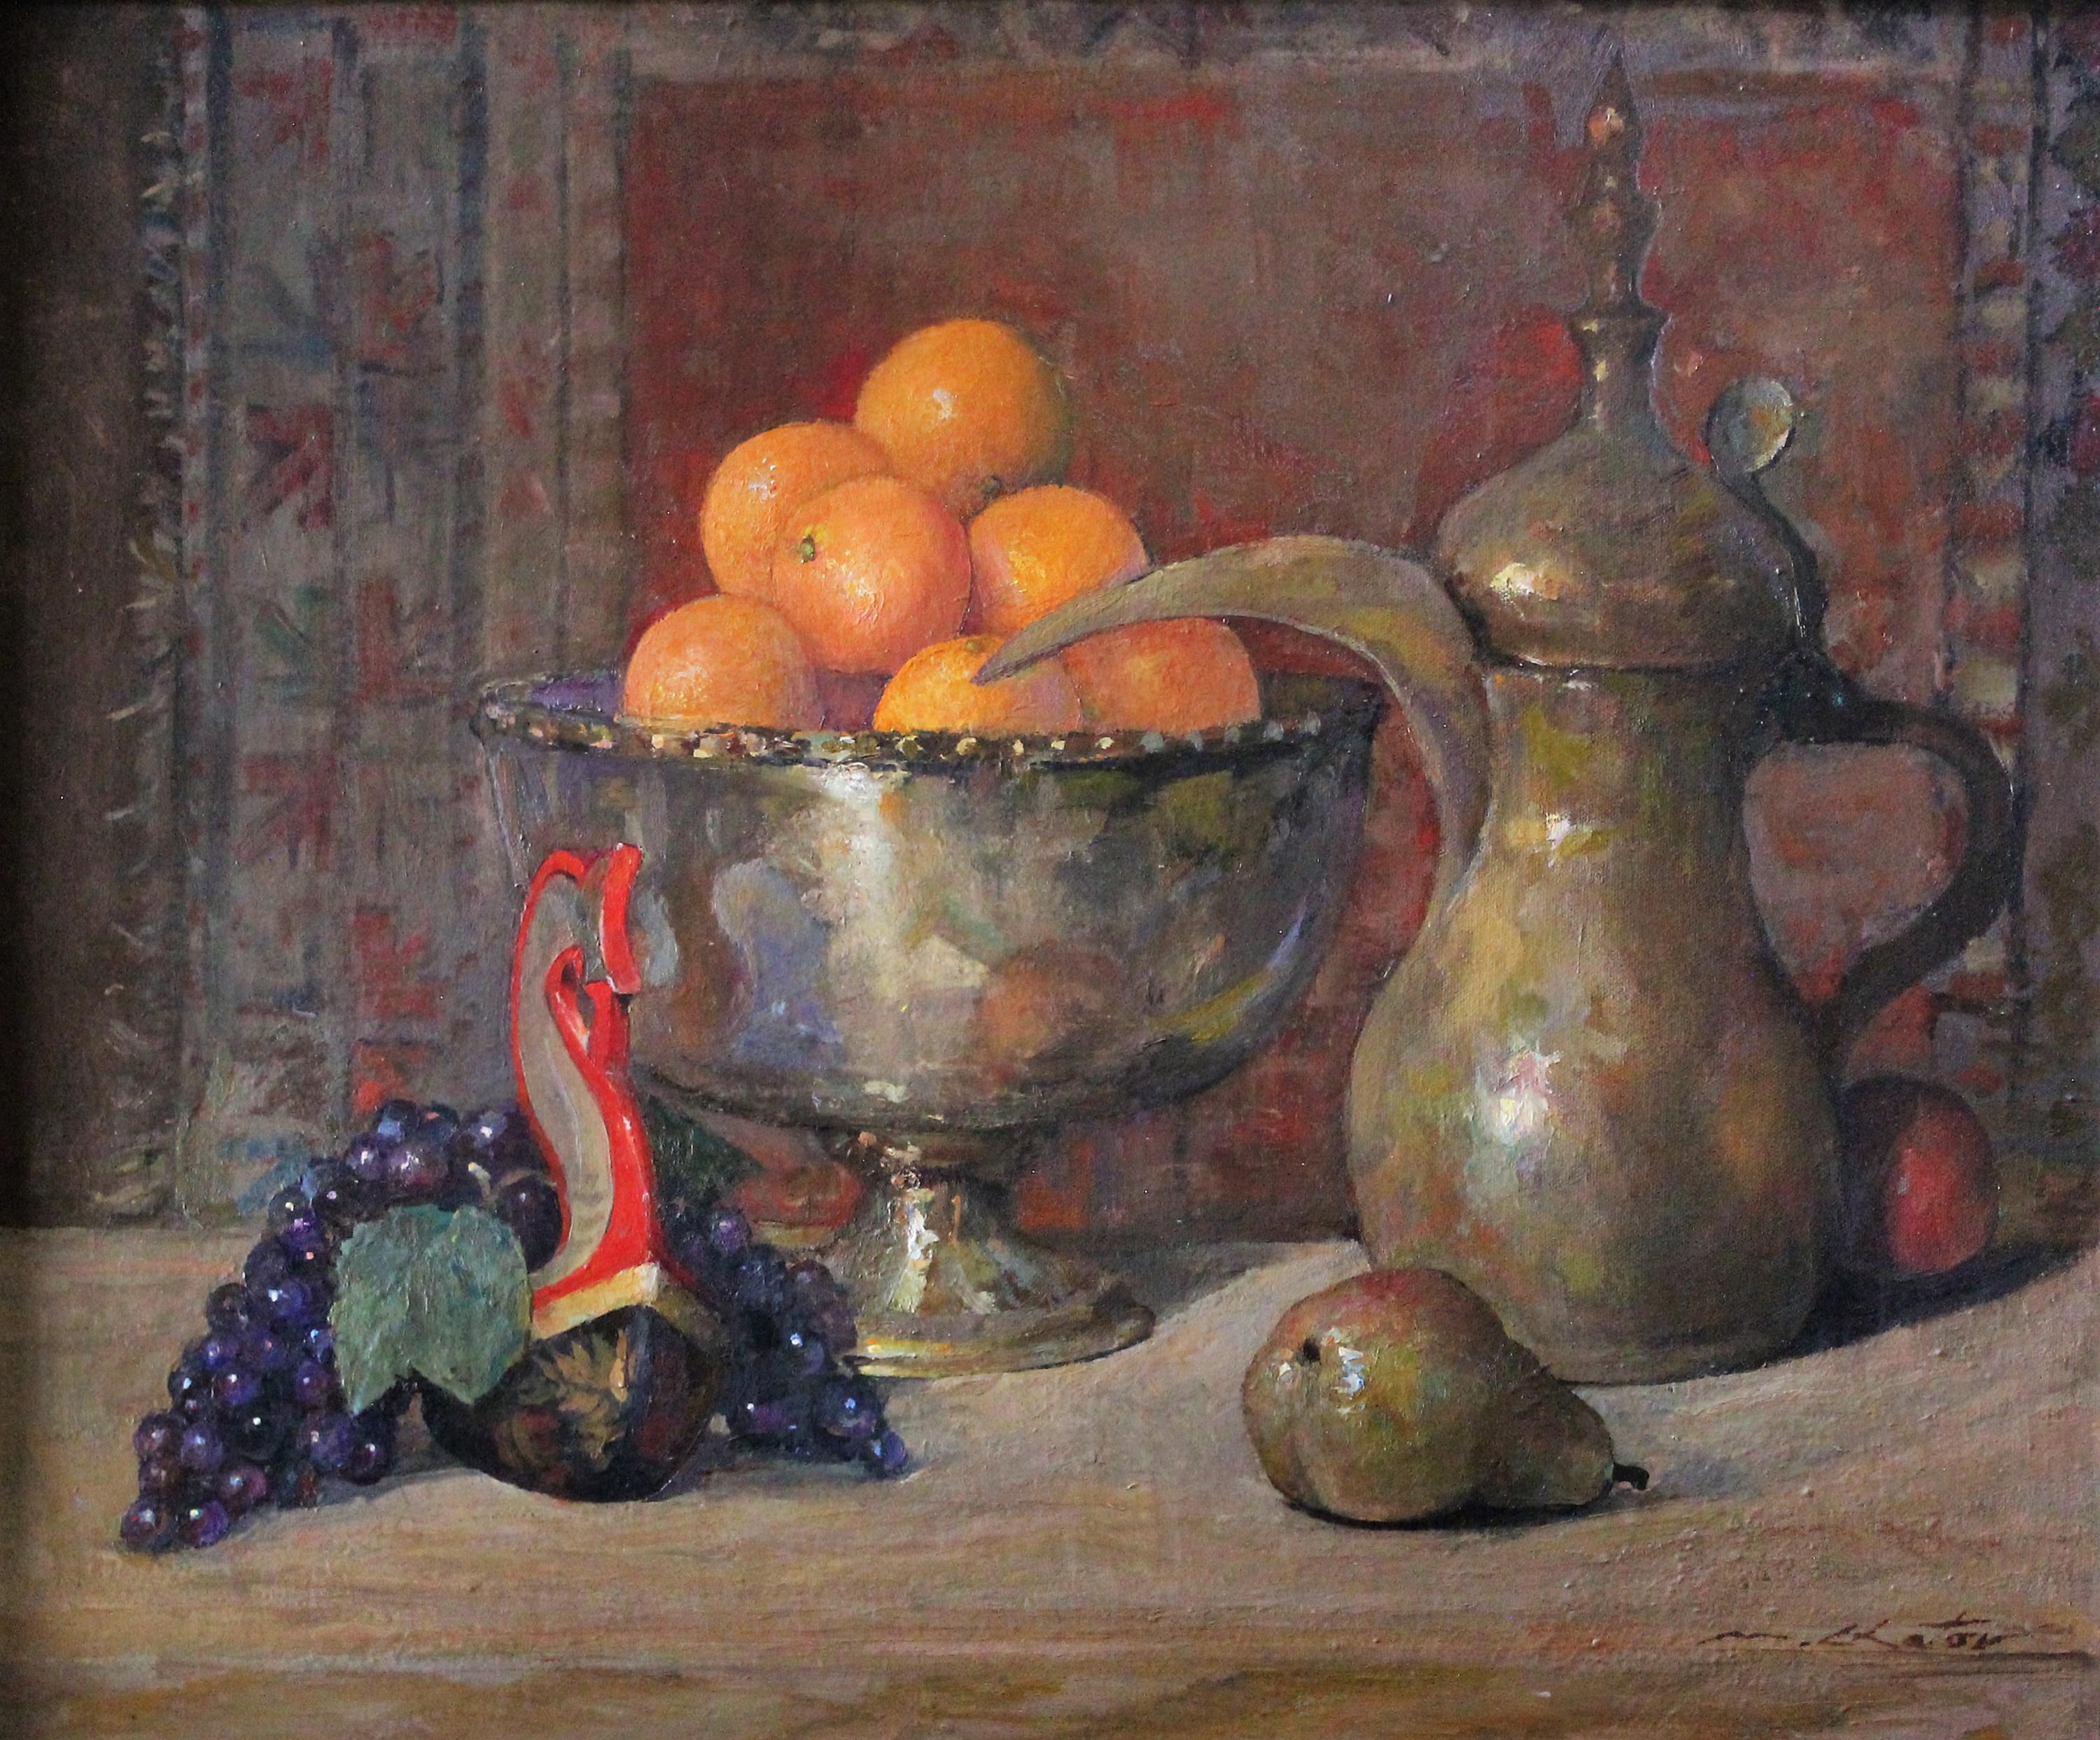 "Still Life with Oranges" - Contemporary Realism - Still Life - Manet